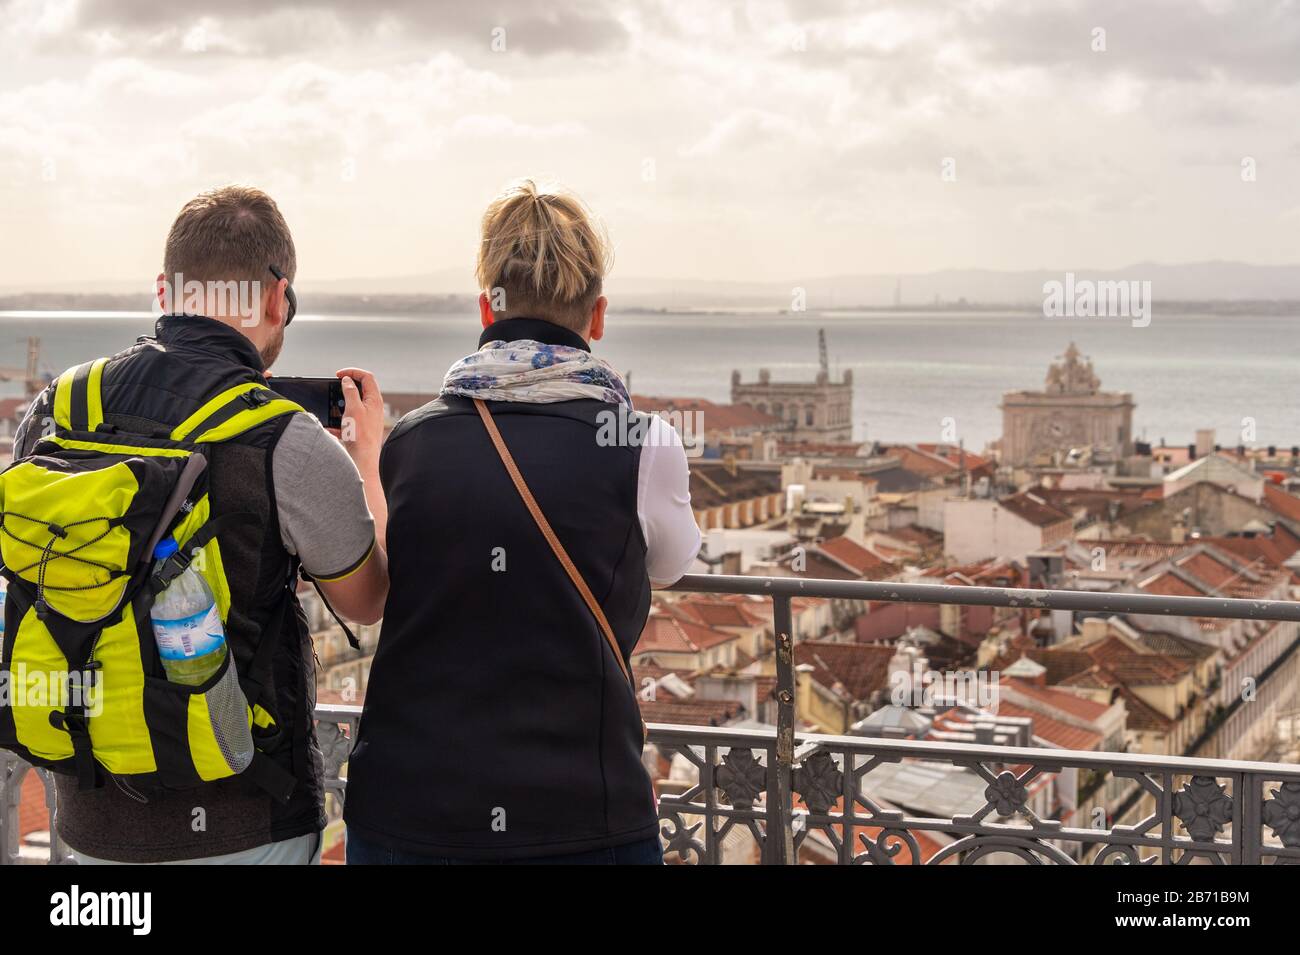 Lisbon, Portugal - 2 March 2020: Tourists looking at the view from Elevador de Santa Justa. Arco da Rua Augusta in the background. Stock Photo